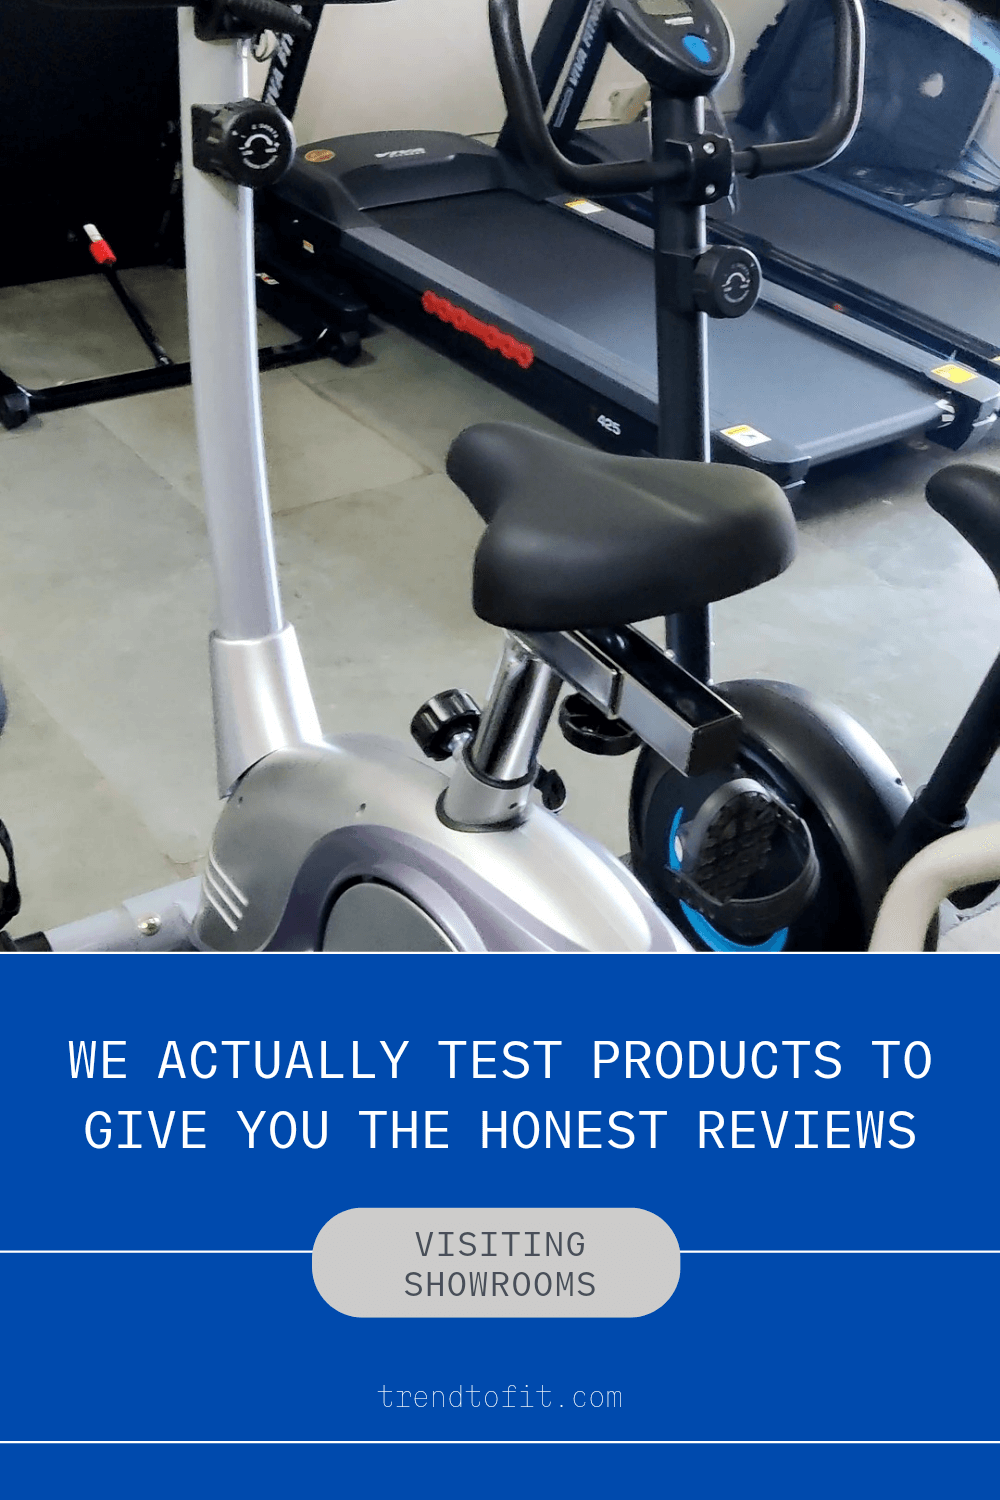 our team managed to get pictures and review of Cockatoo ce03advance elliptical cross trainer